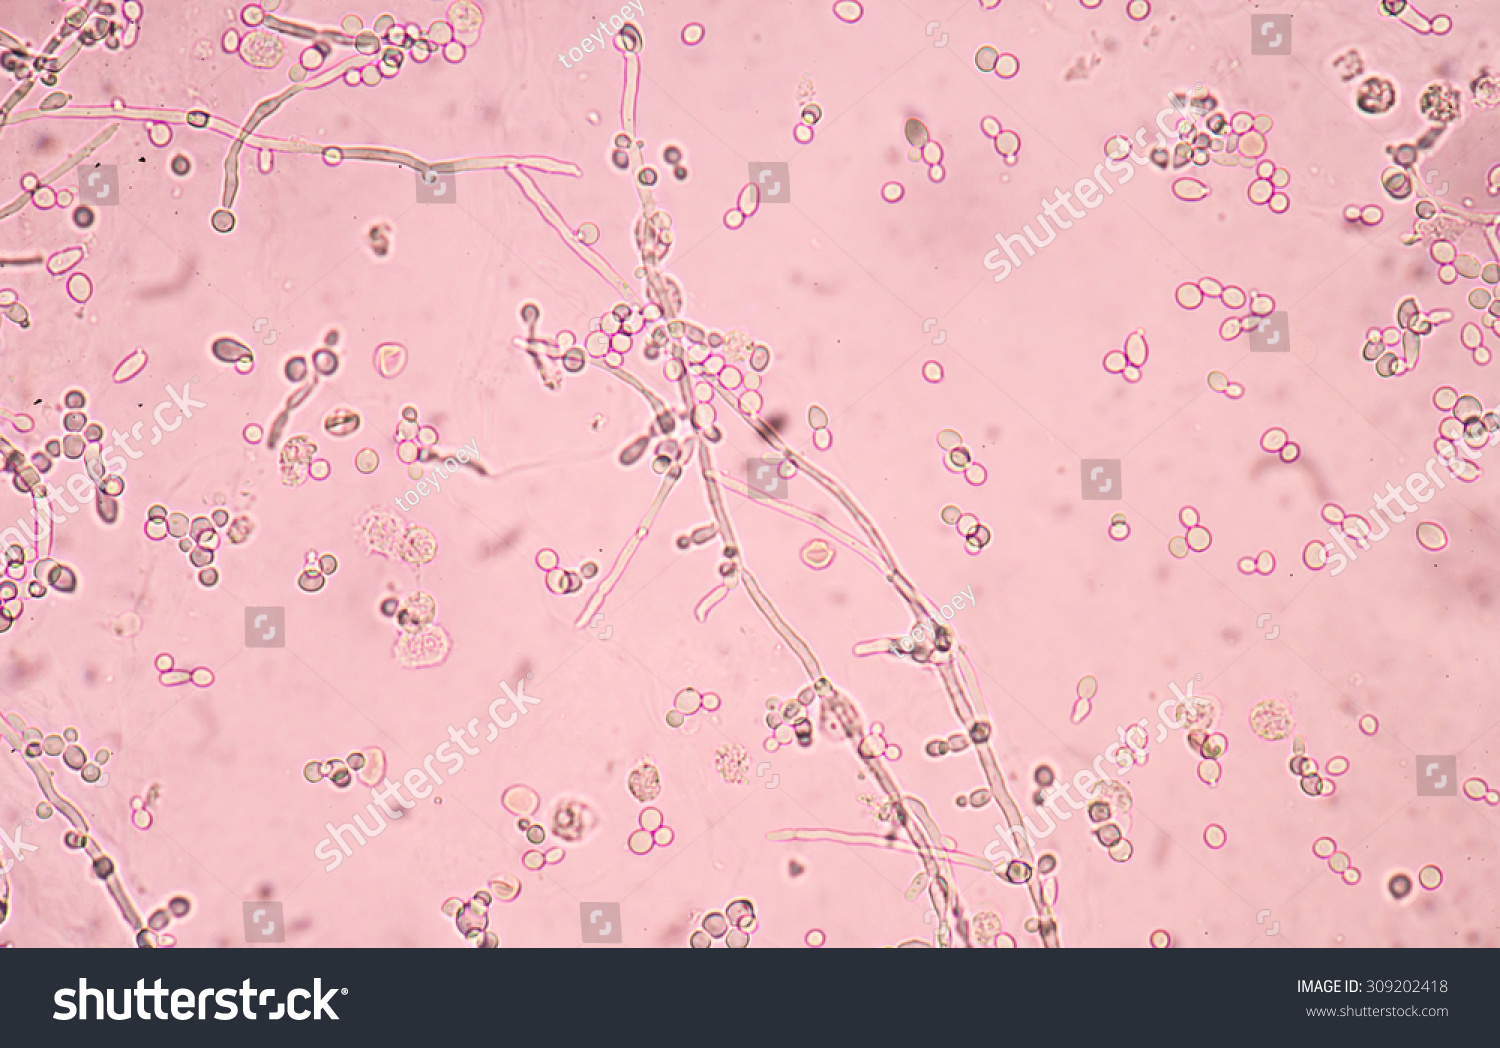 Budding Yeast Cells With Pseudohyphae In Urine Sample Fine With ...